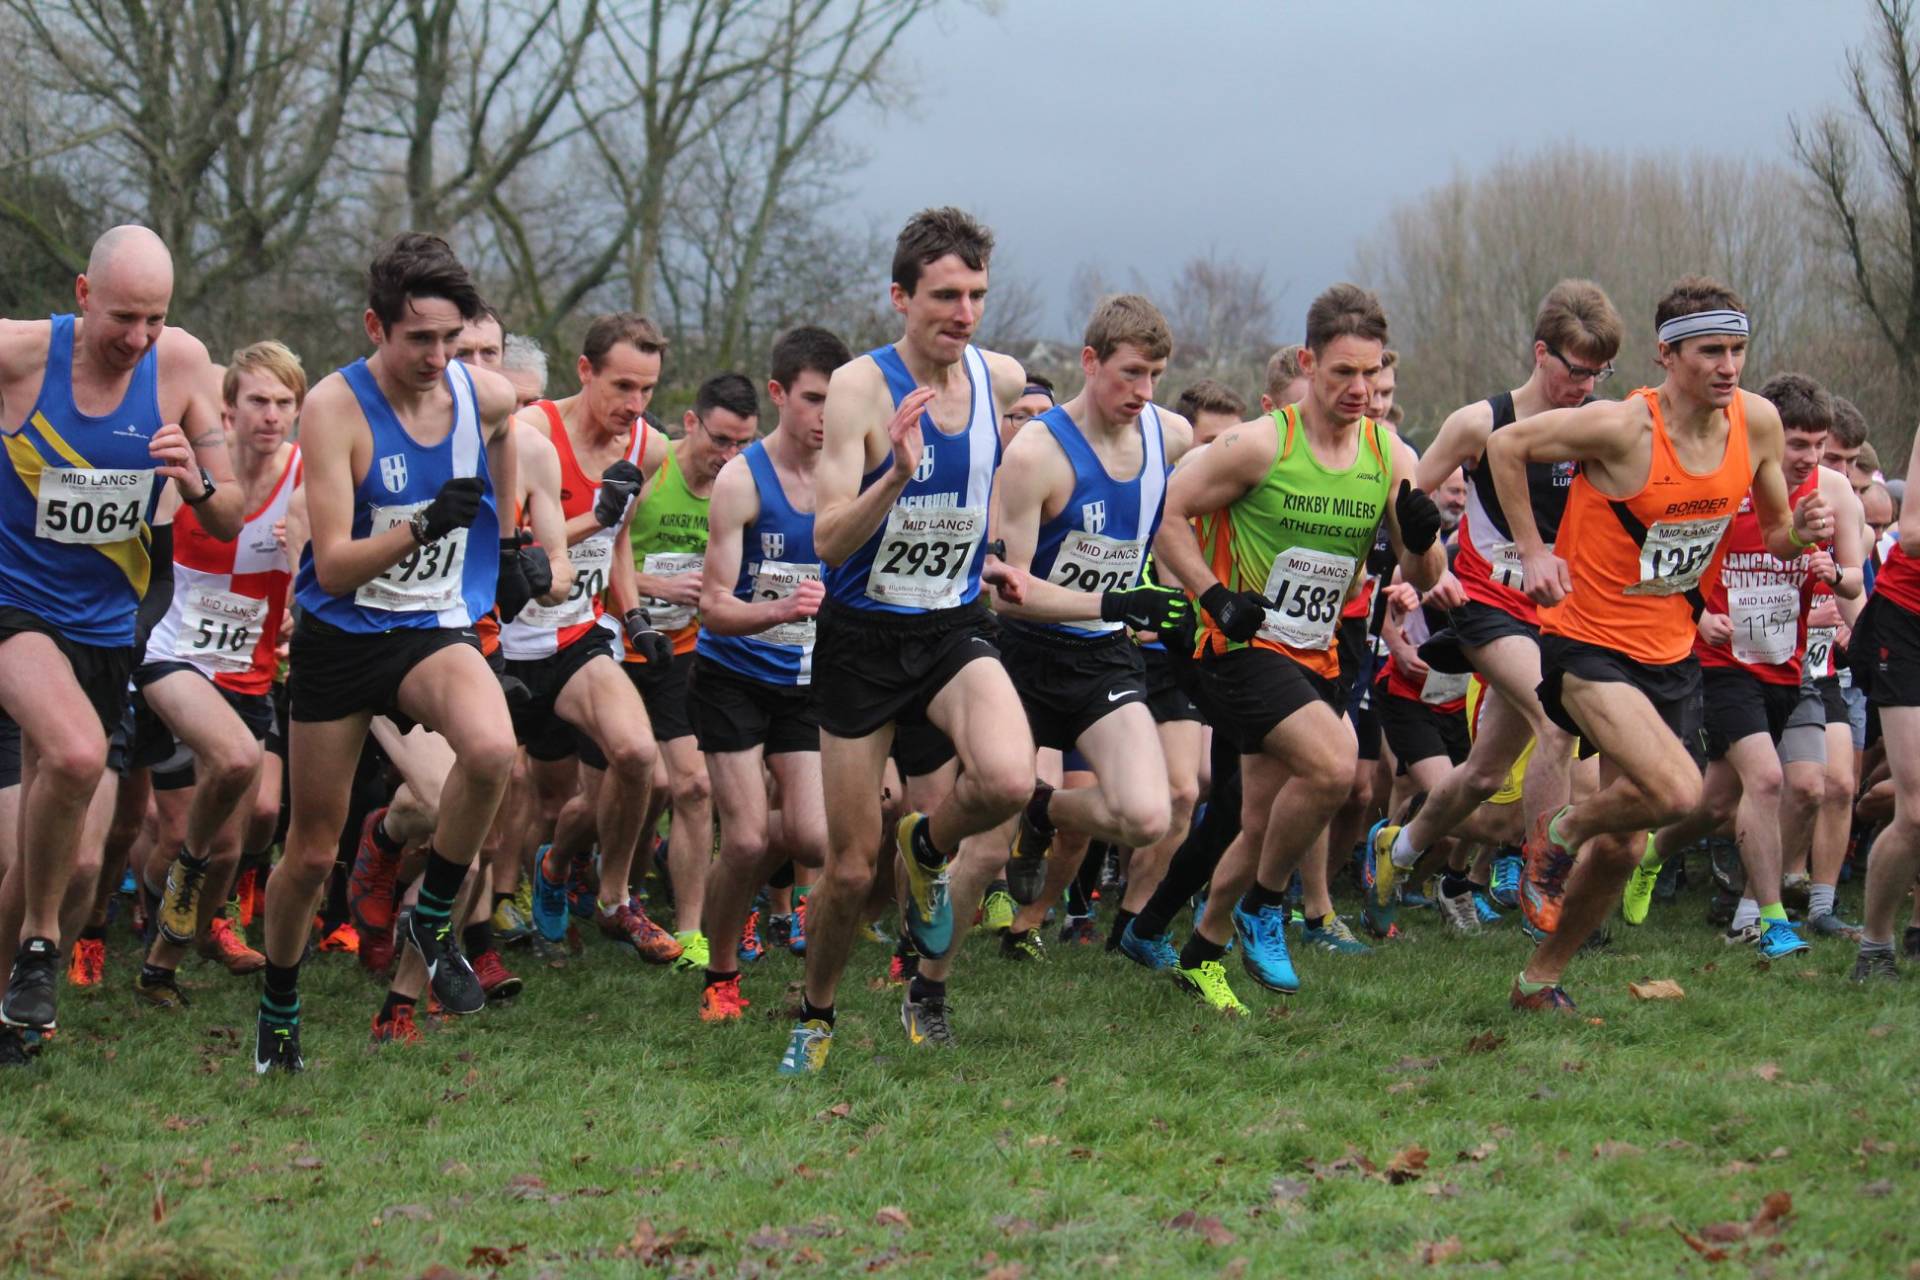 Senior Men & Women Win Mid Lancs at Burnley – Bronze Medals for Matt (U17 1500m) & Dominic (Senior 800m) at Northern Indoor Championships – Victoria Wins Garstang 10k – 3rd Place for Calum at East Lancs Hospice 10k – On the Fells with the Harriers